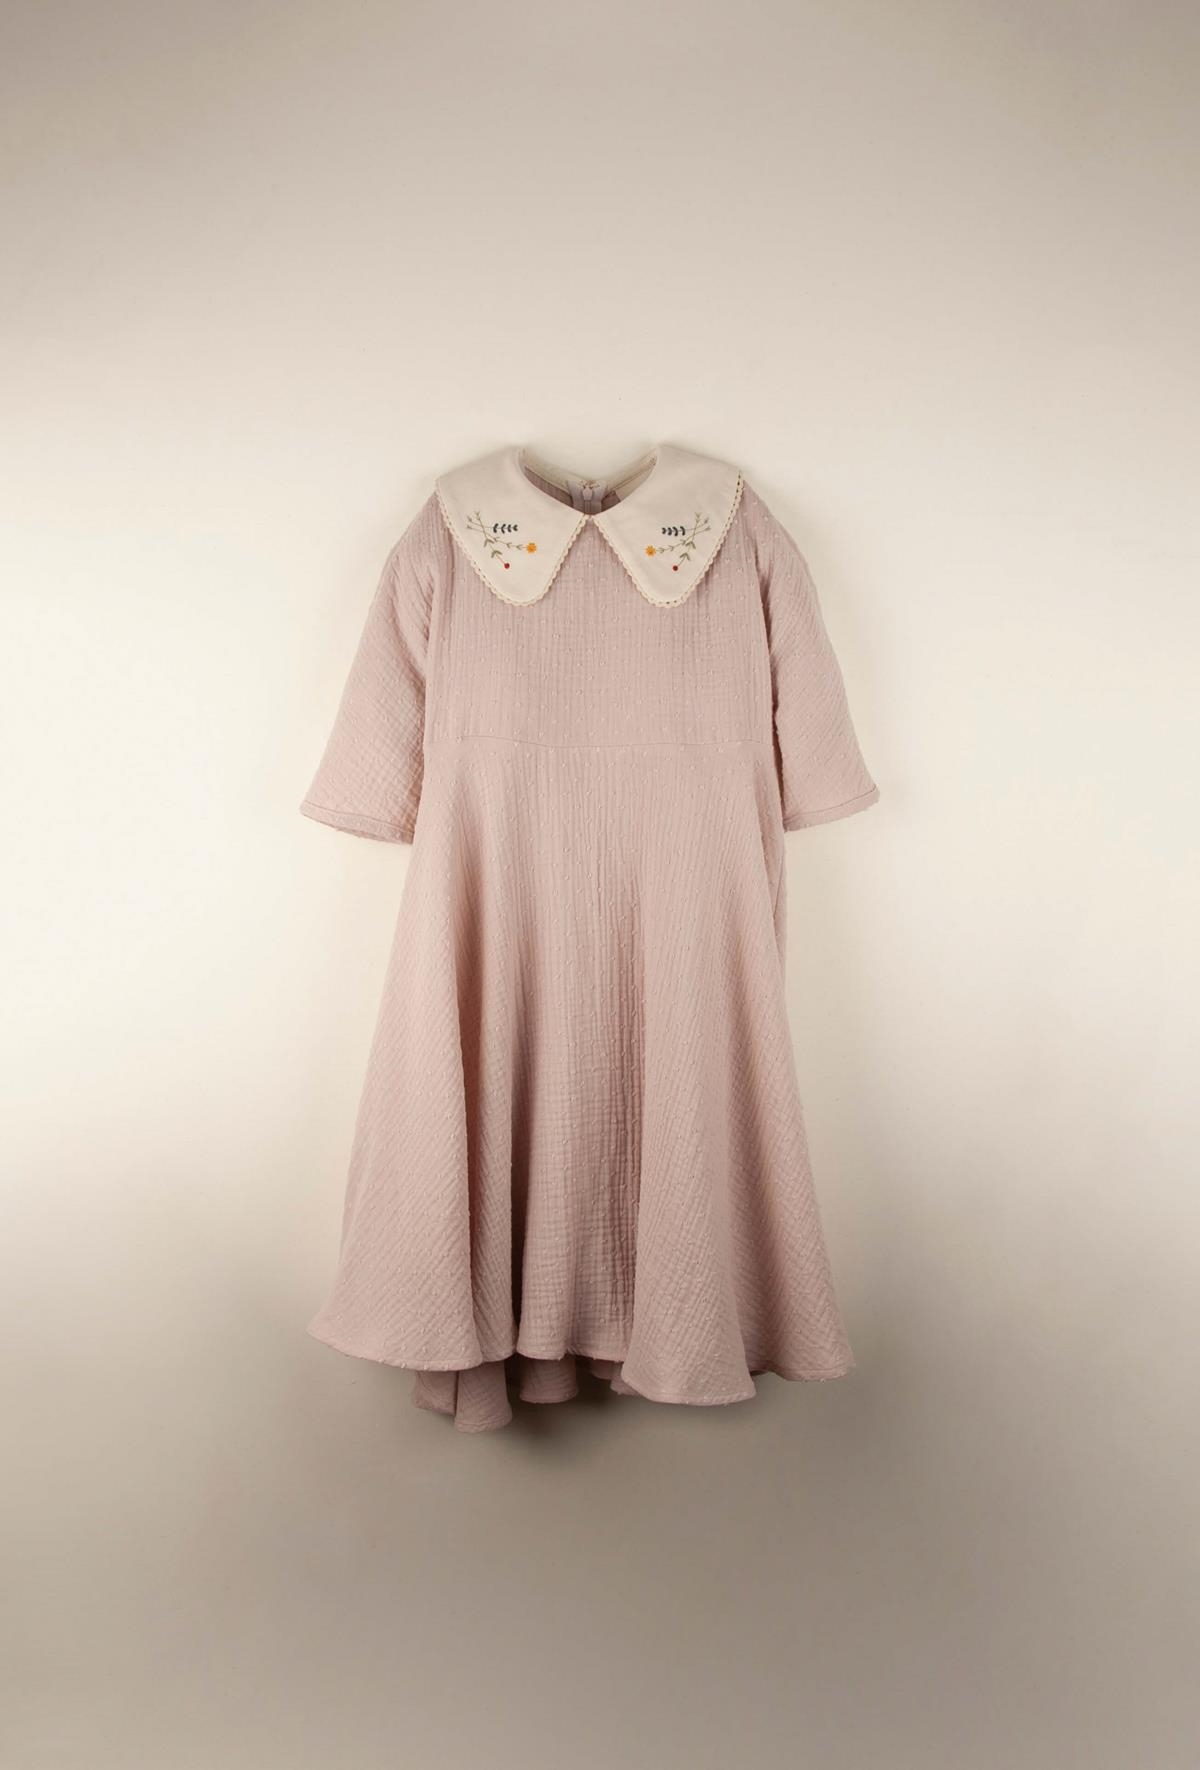 Mod.30.2 Pink organic dress with embroidered collar | SS22 Mod.30.2 Pink organic dress with embroidered collar | 1